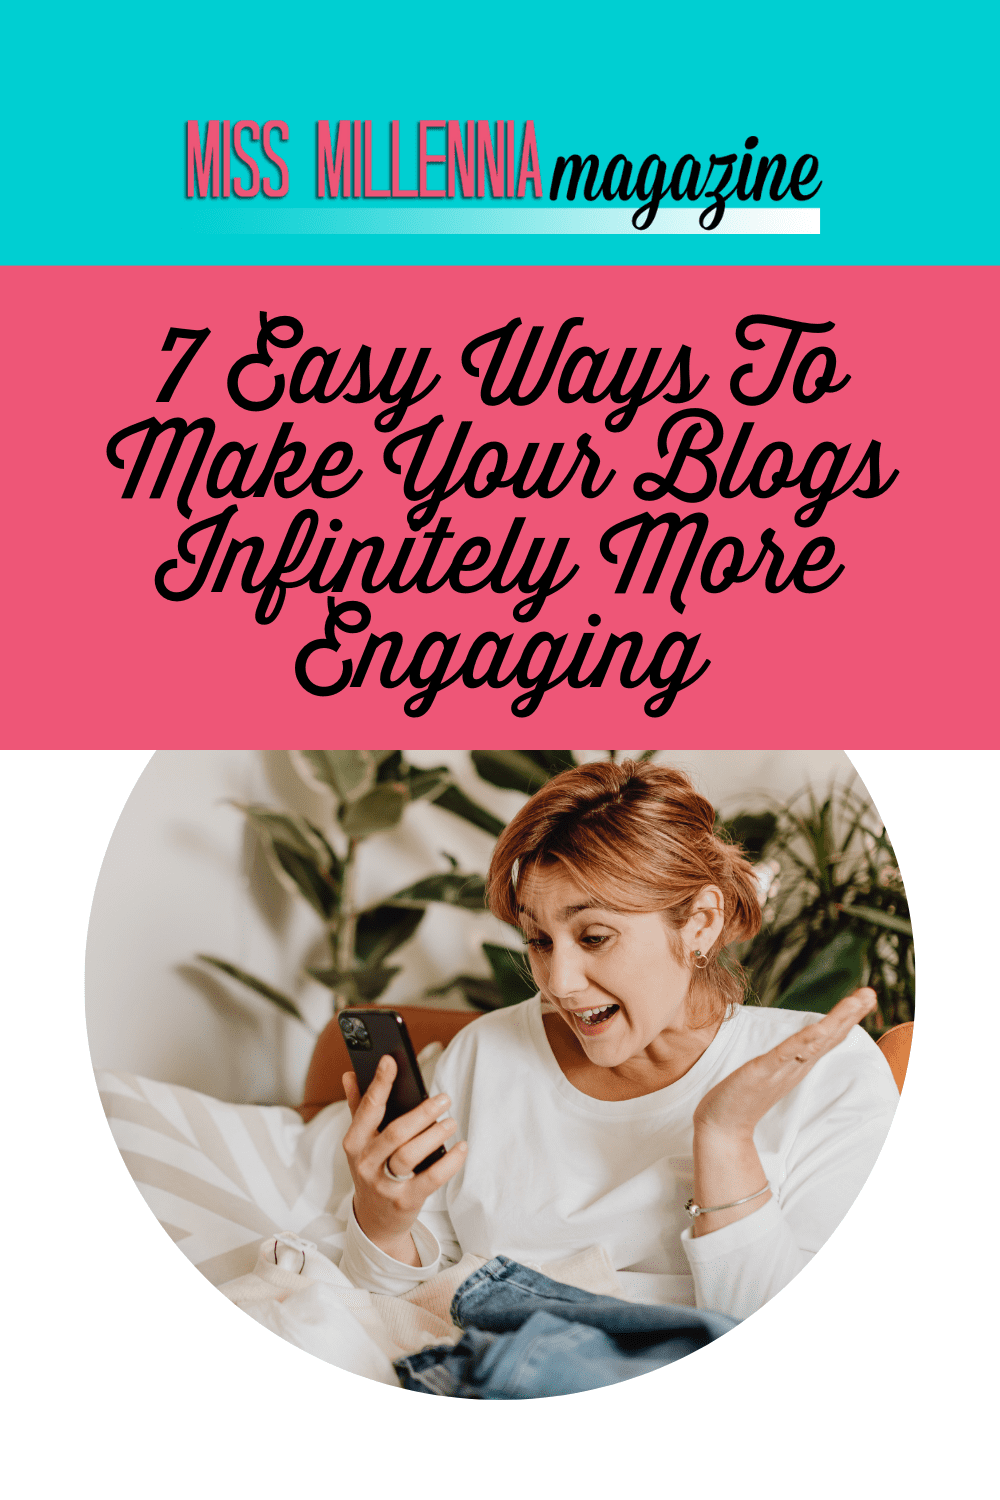 7 Easy Ways To Make Your Blogs Infinitely More Engaging